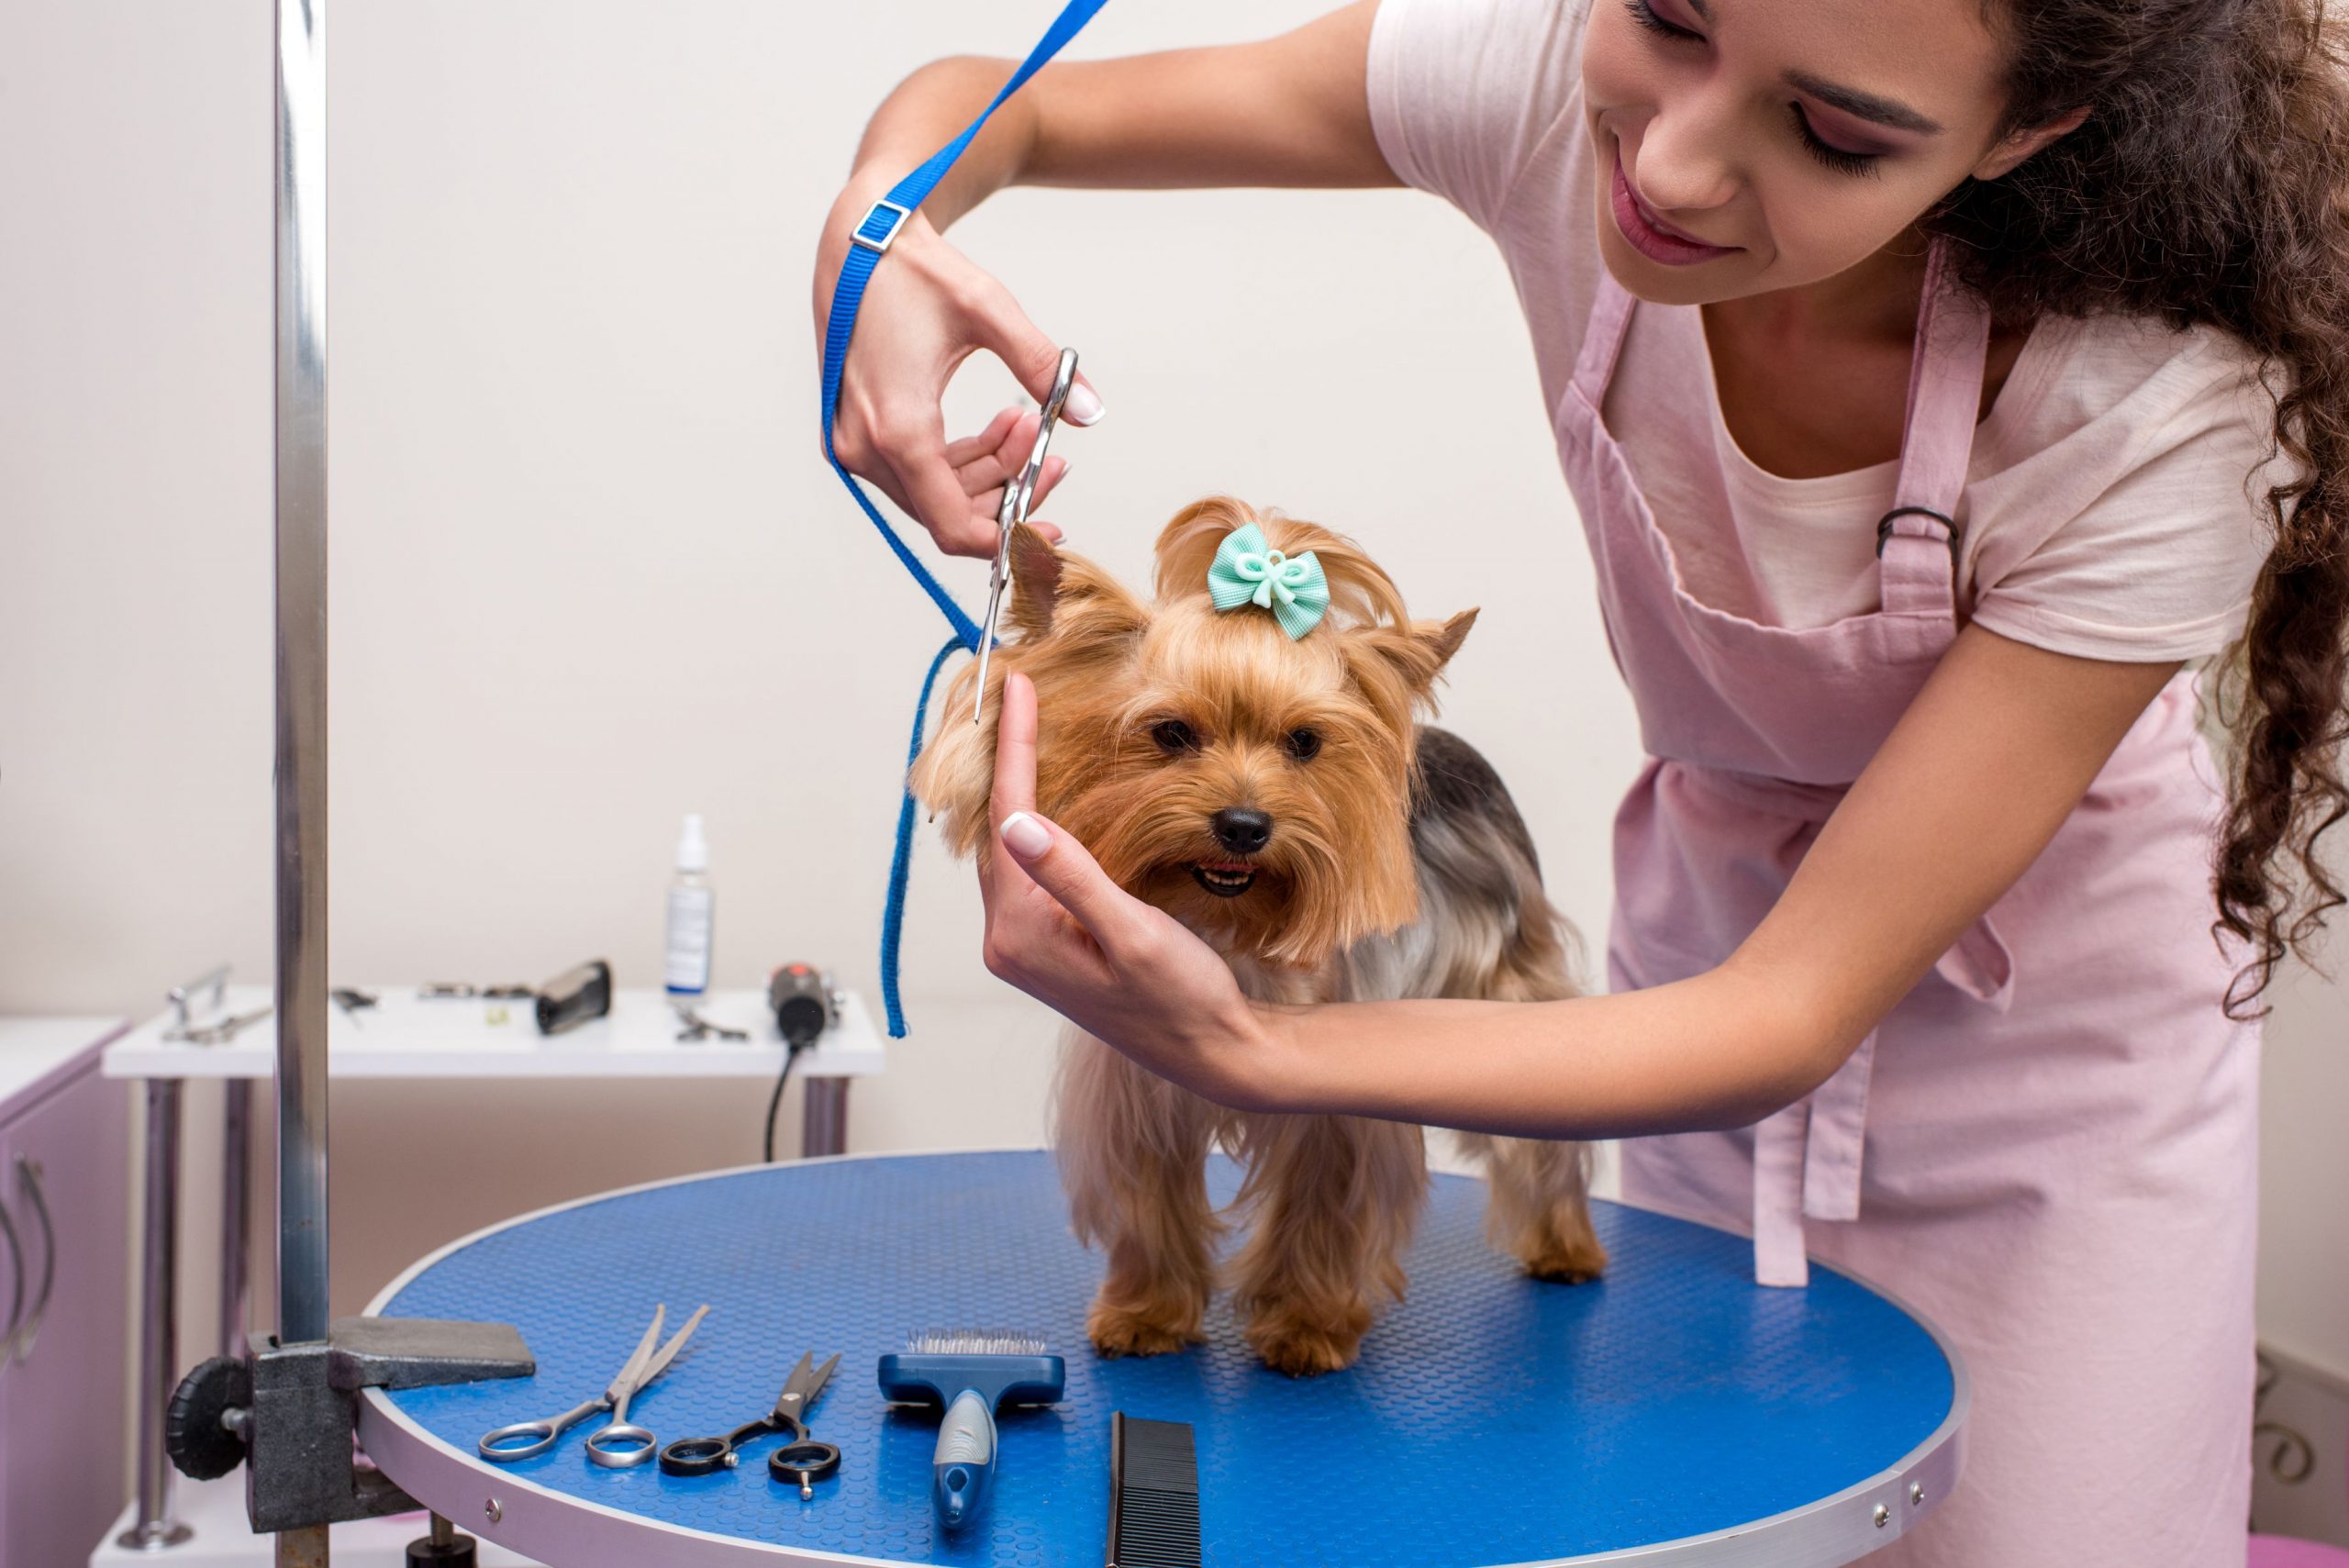 Things to Consider When Choosing Dog Grooming Services